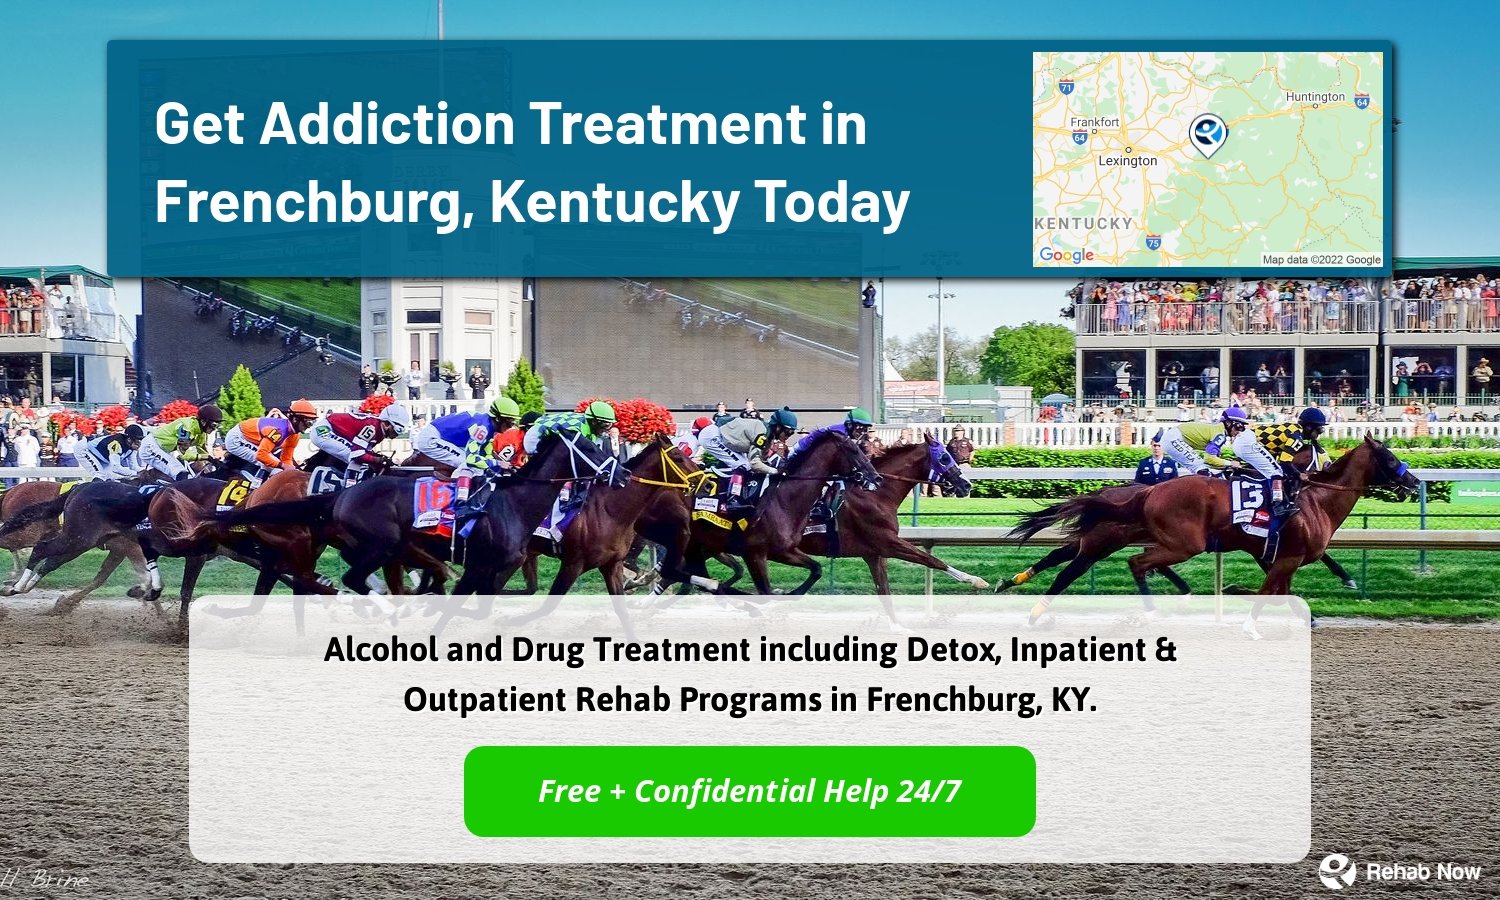 Alcohol and Drug Treatment including Detox, Inpatient & Outpatient Rehab Programs in Frenchburg, KY.